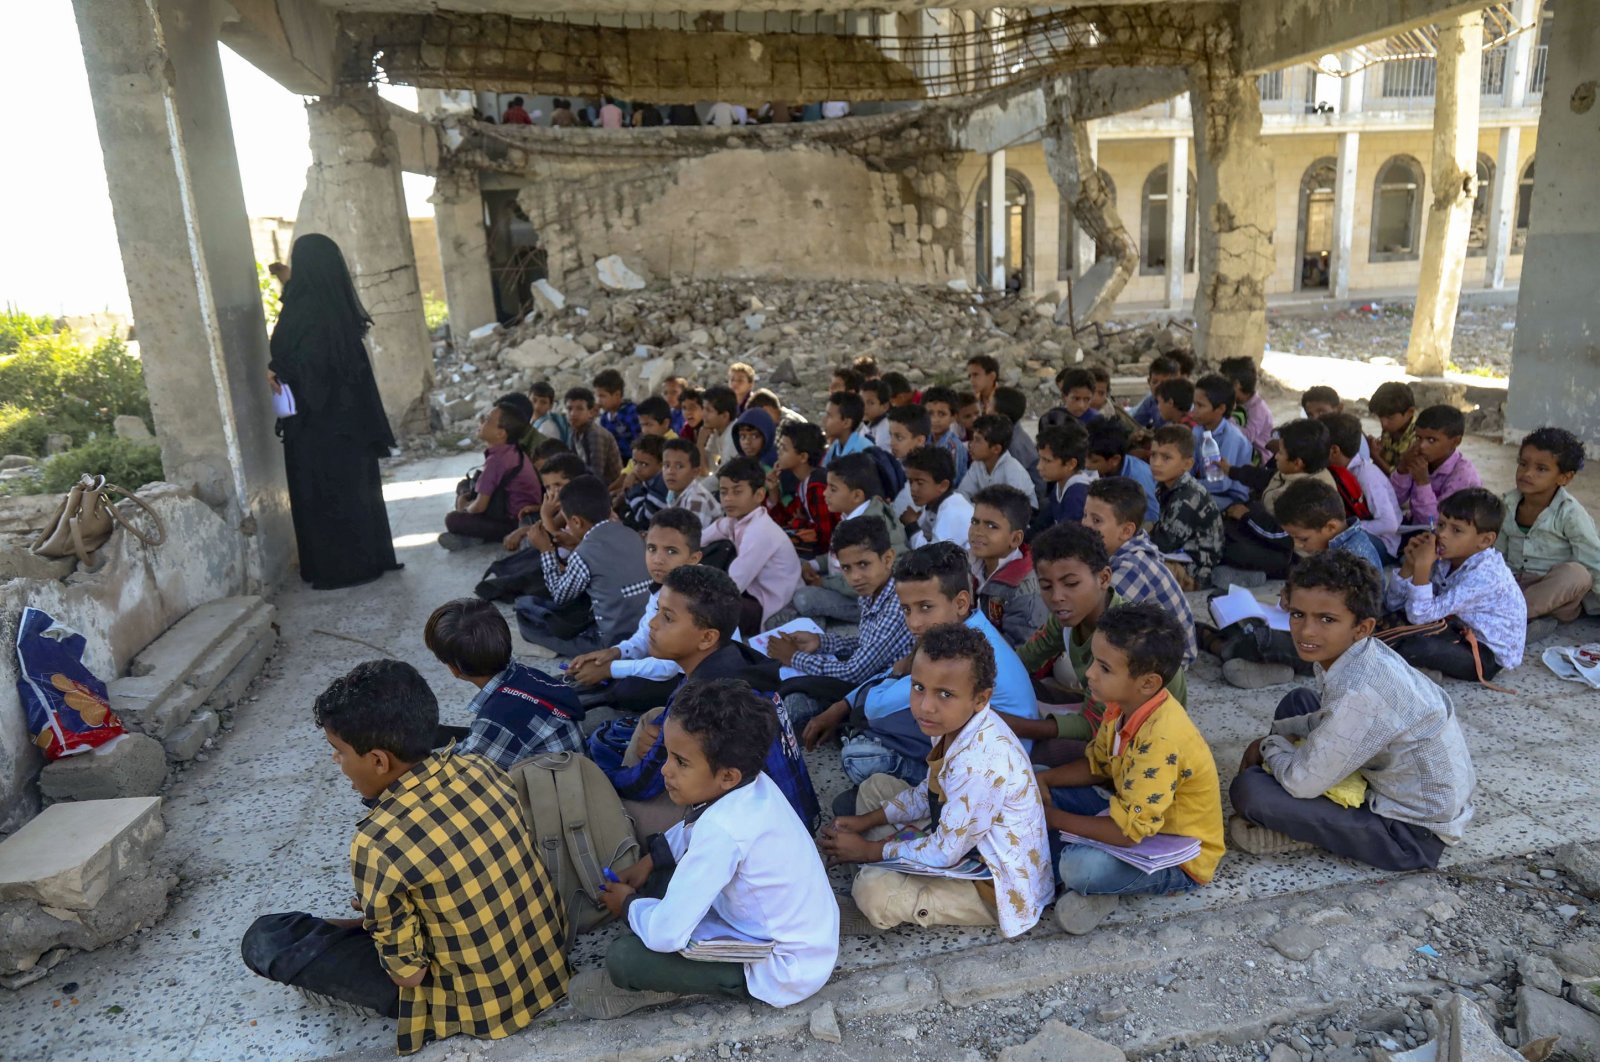 Yemeni pupils attend class on the first day of the new academic year in a makeshift classroom in their school compound, which was heavily damaged two years ago in an air strike, in the country's third-city of Taez on Oct. 7, 2020. (AFP Photo)